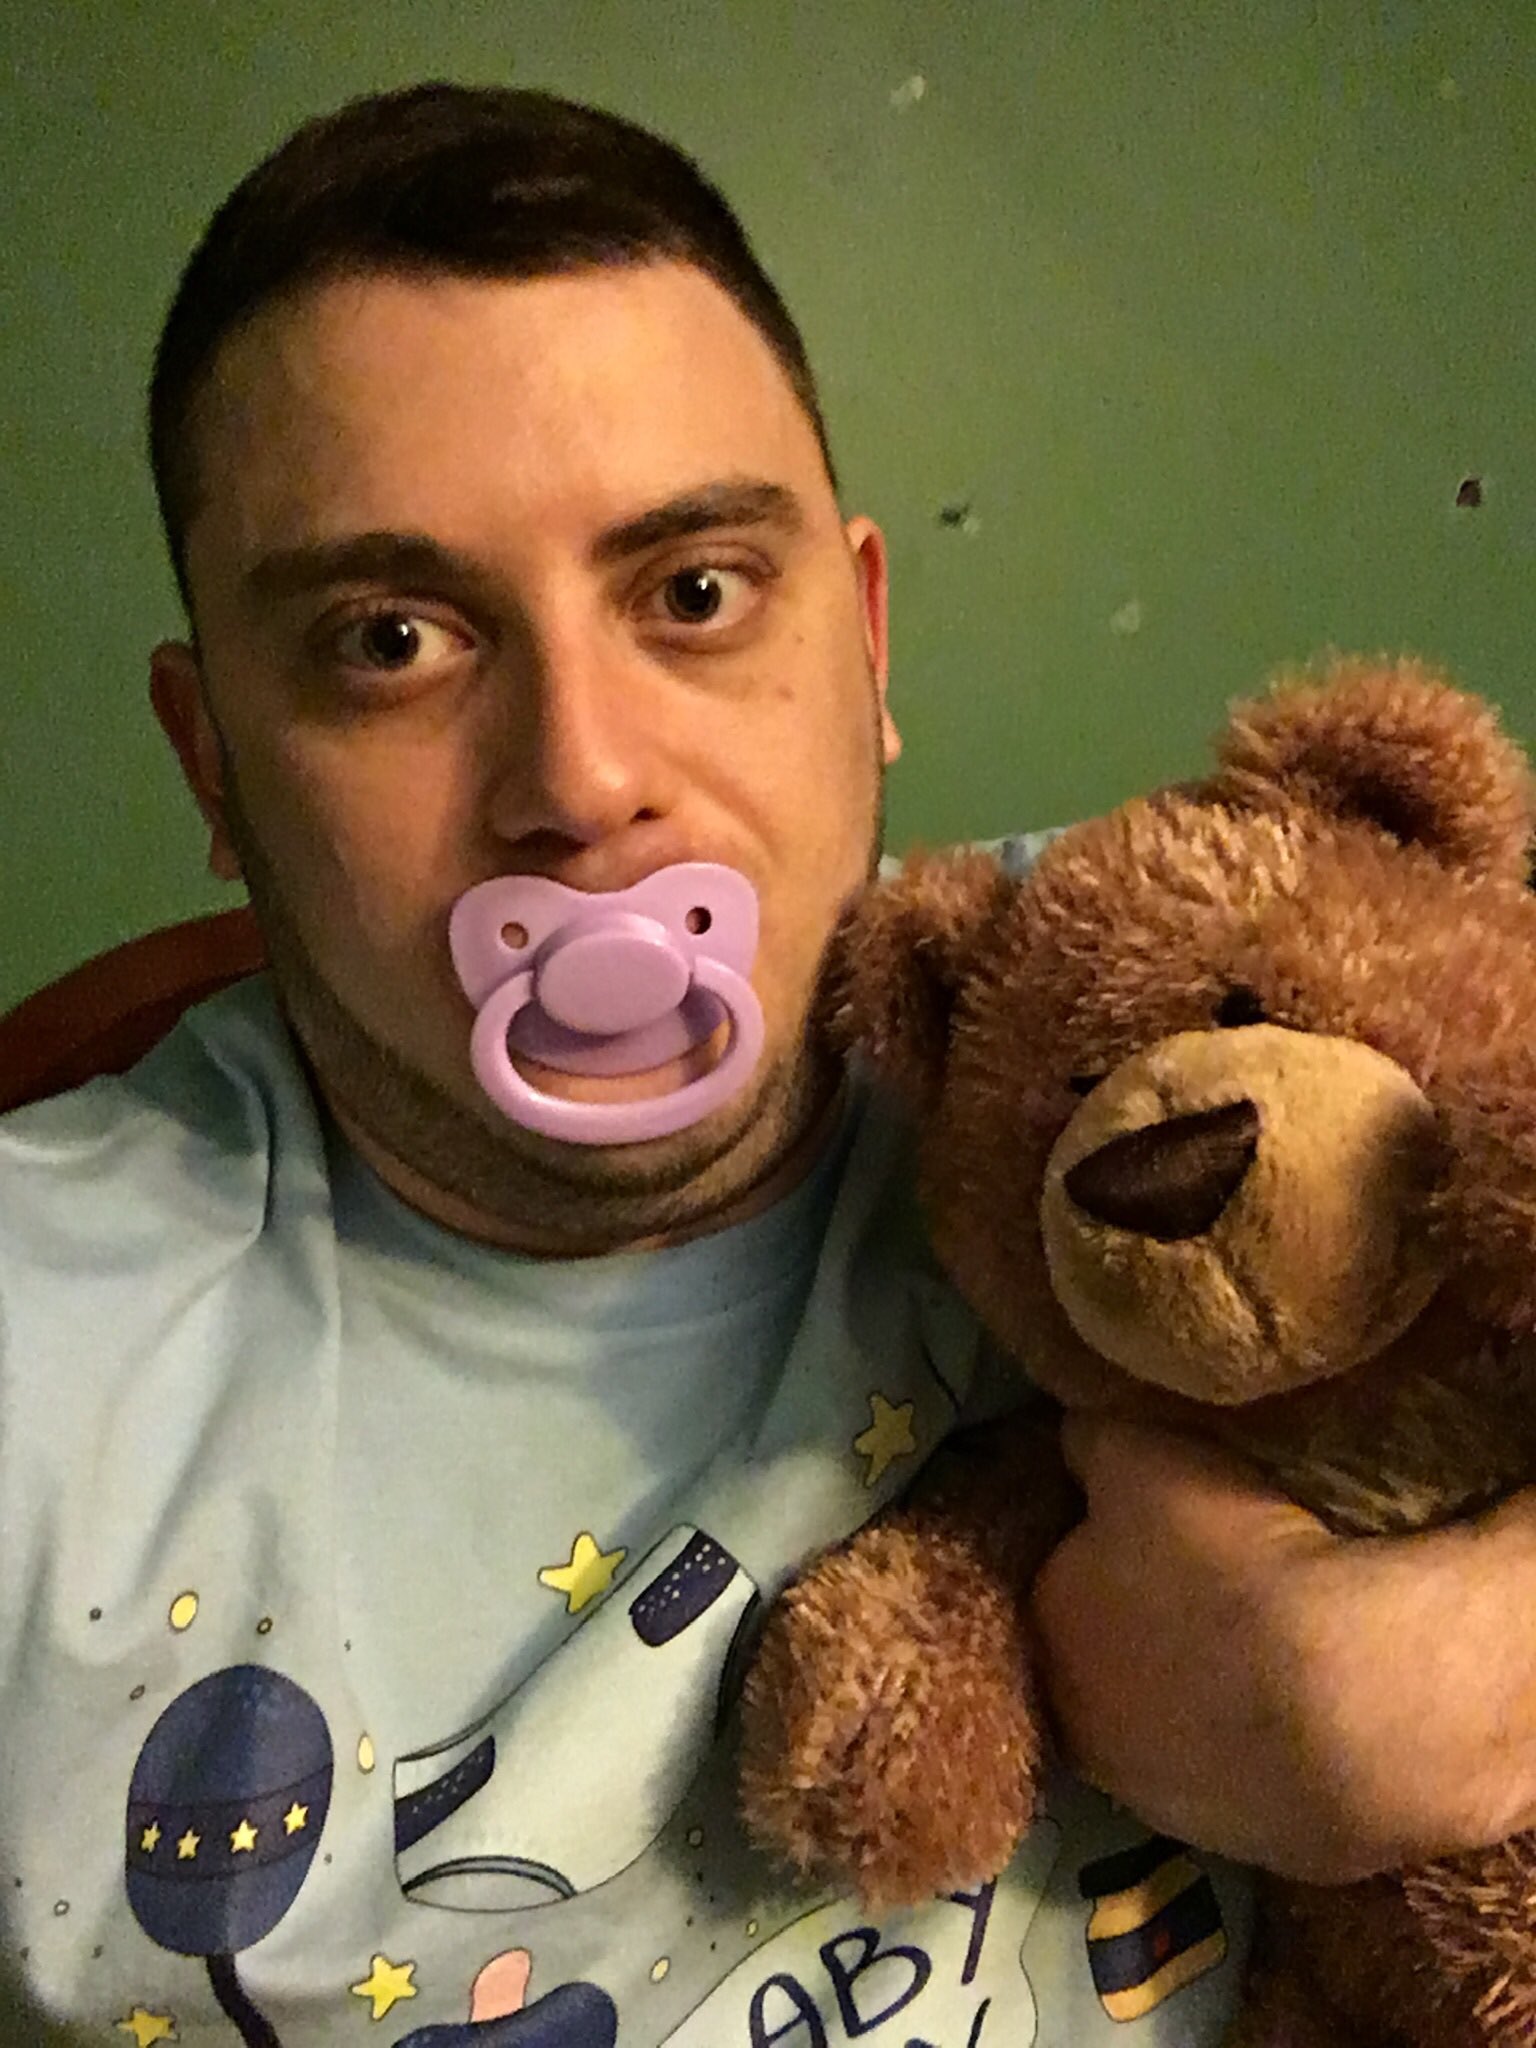 A grown man sits on the floor, saucking a baby nipple while playing with a teddy toy.